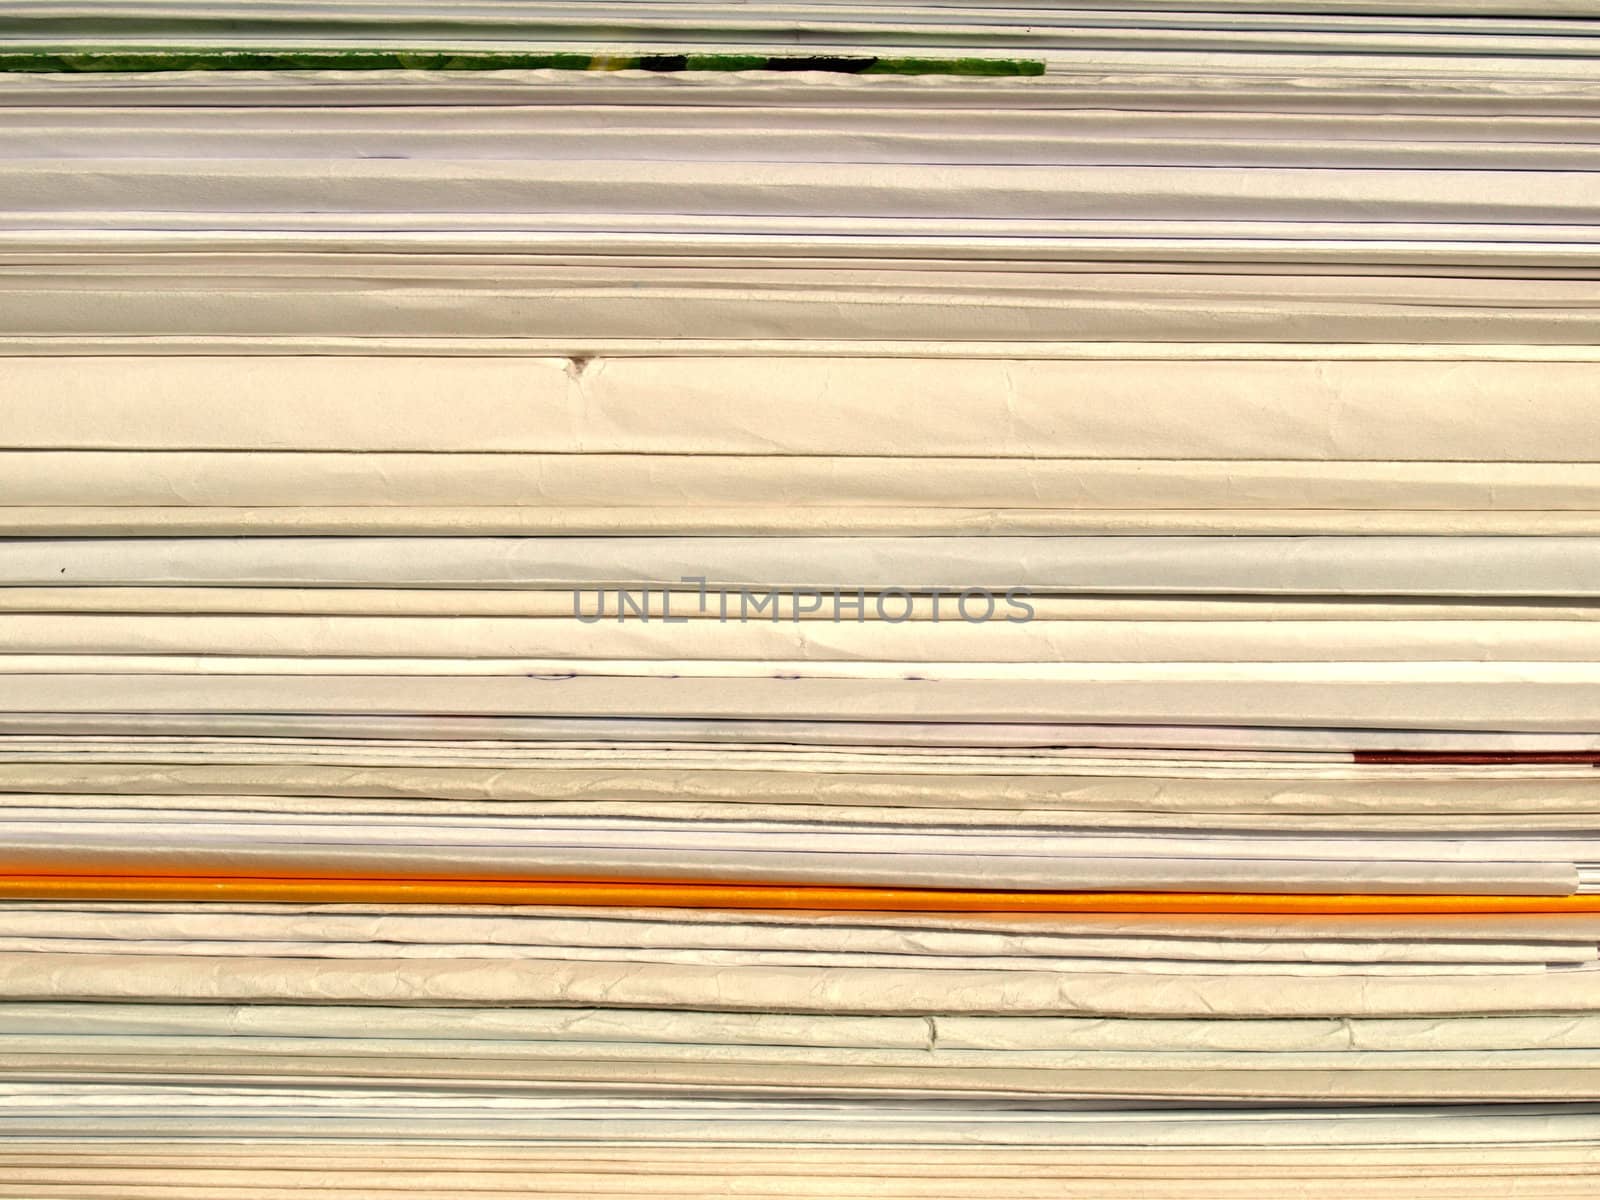 Detail of office paper documents or letters